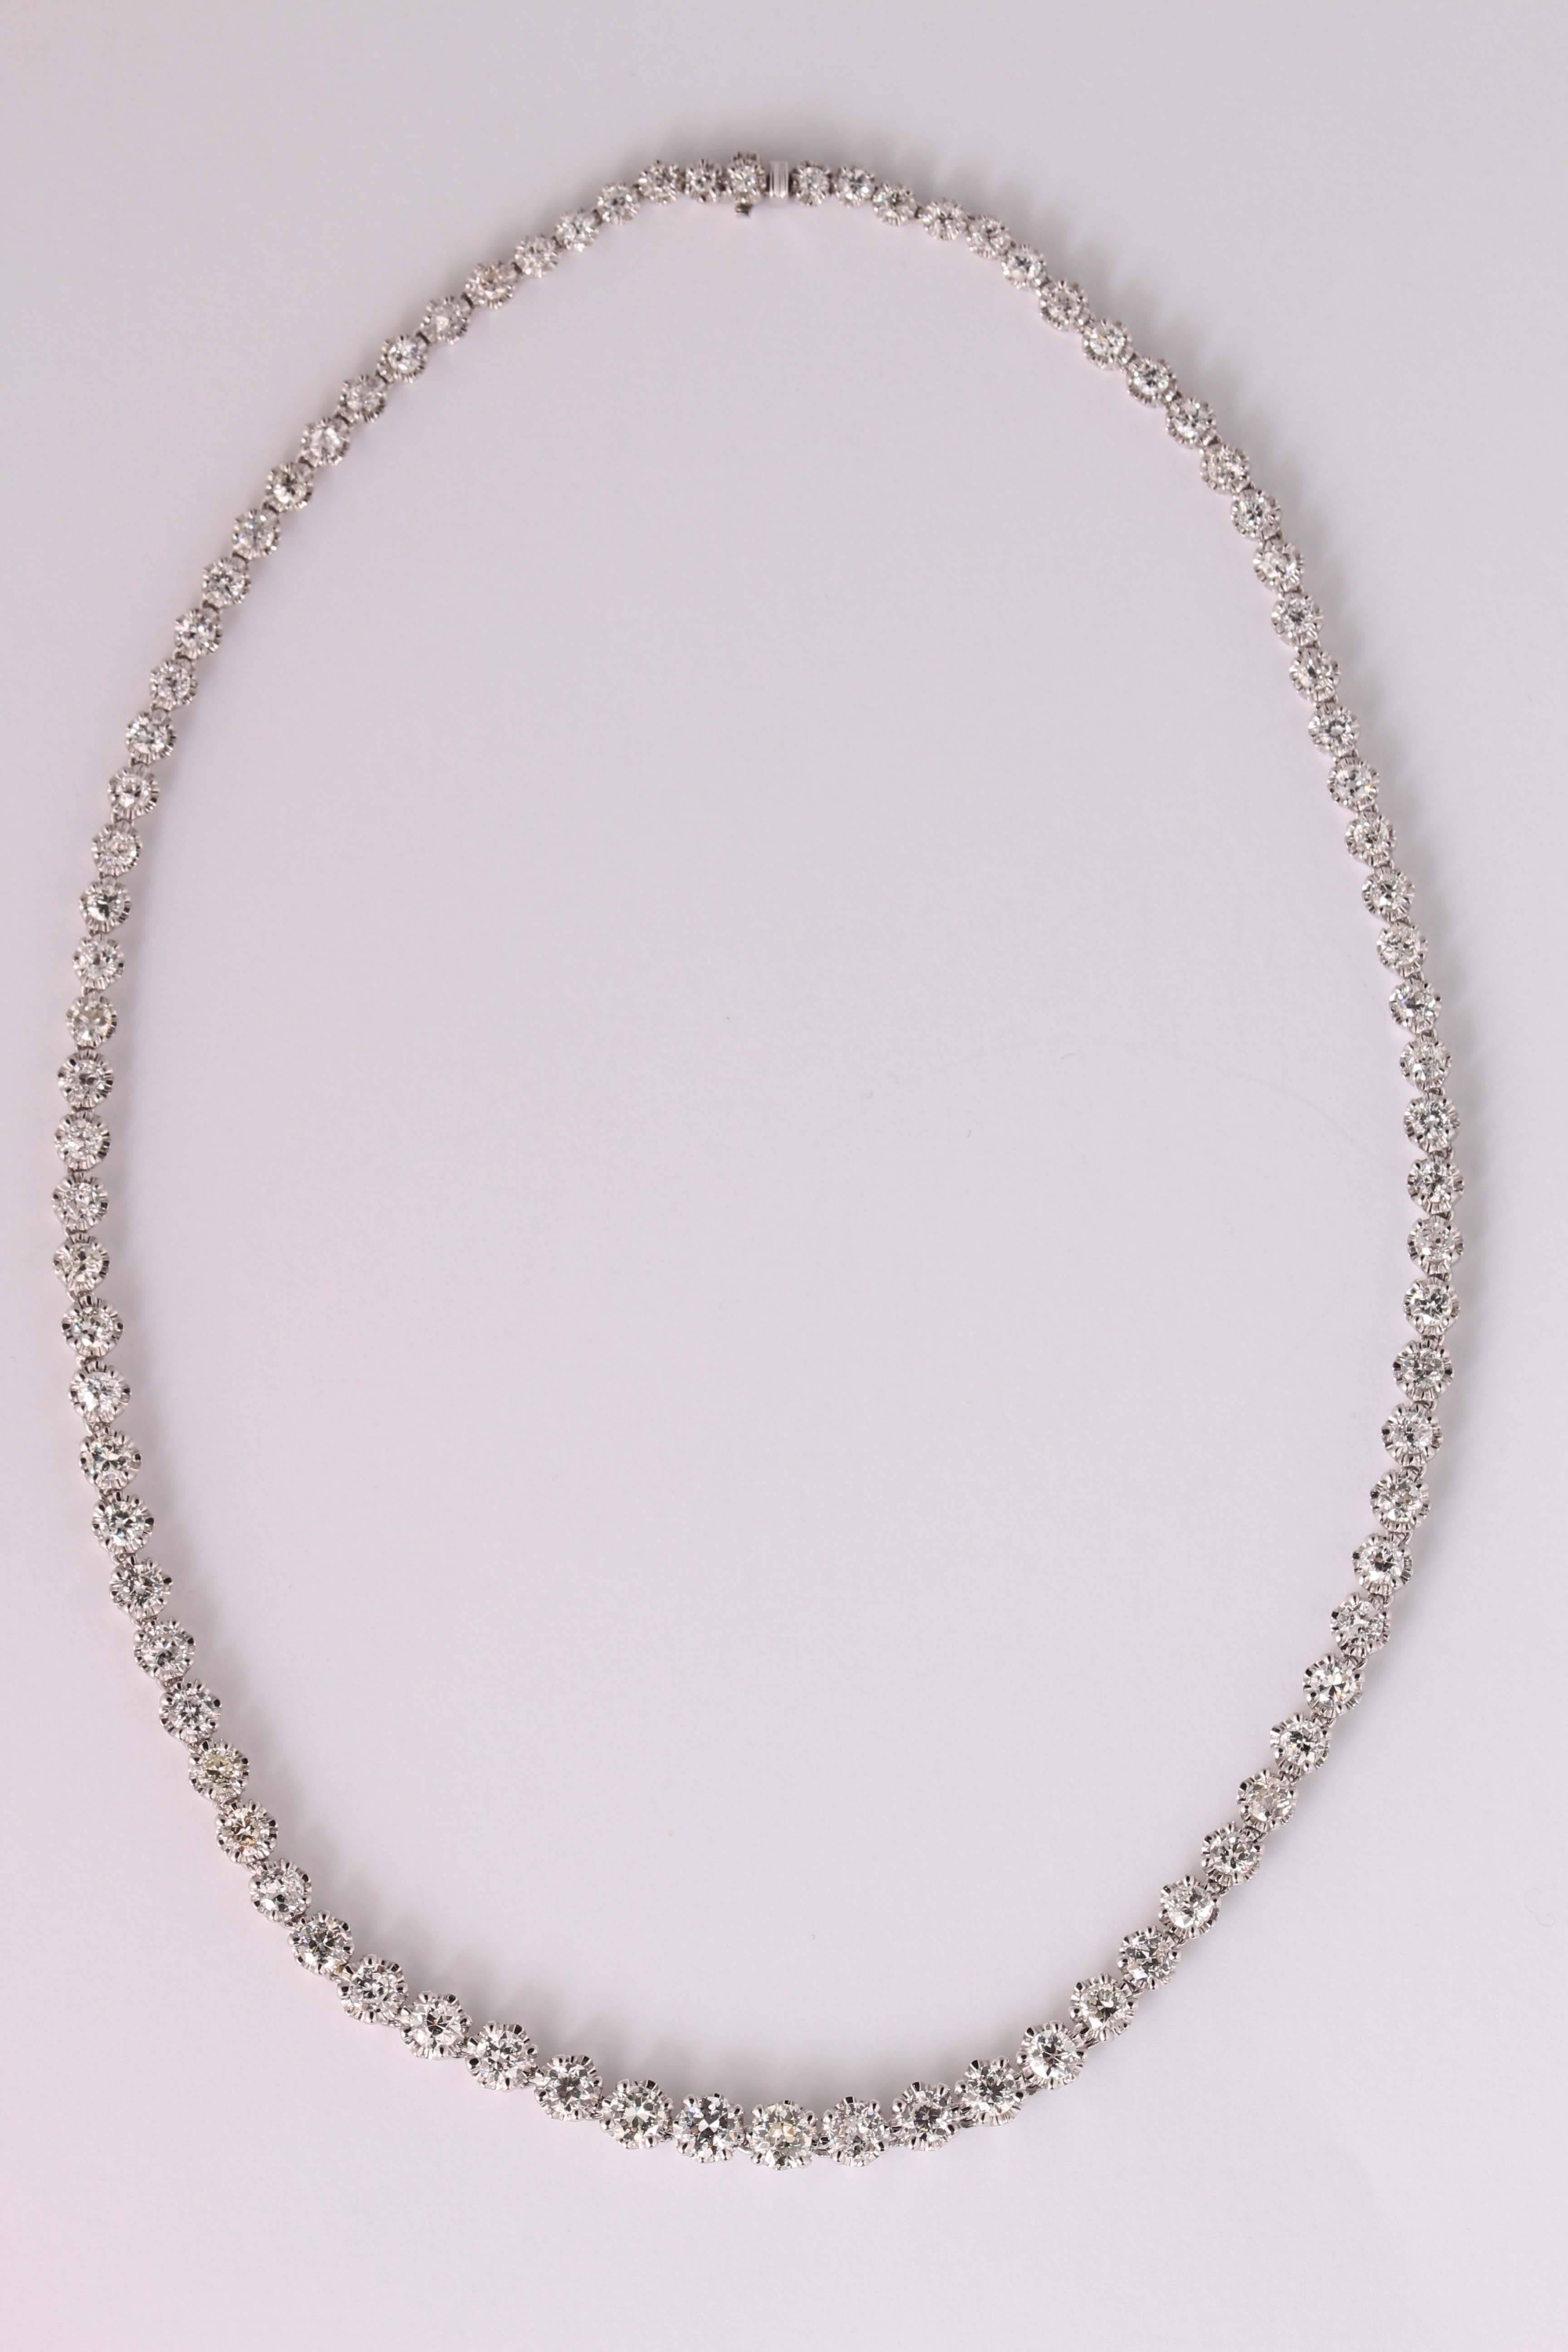 Very elegant and impressive necklace made of natural diamonds of various cuts, most media cuts. On request you can have a certificate.
Diamonds are vintage, the frame is modern.
Diamonds 14.46 ct
18 ct white gold
Weight 32.60 g
Length 42.20 cm 